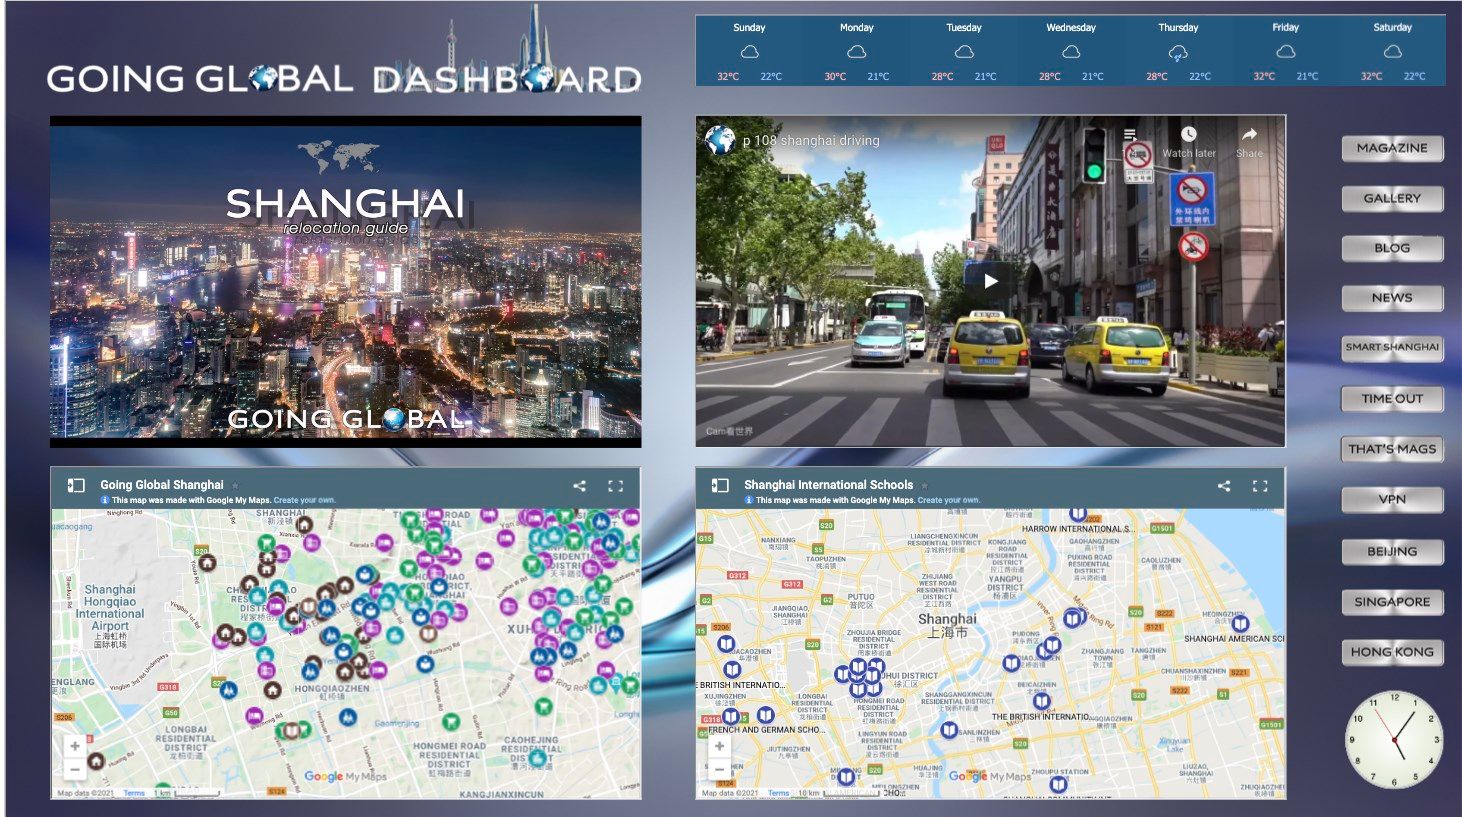 Going Global’s Dashboard edition provides full access to the wealth of knowledge from all titles in the Going Global series as well as quick access to our listings. All relevant media in Singapore is bookmarked to assist better acclamation upon arrival in the city.